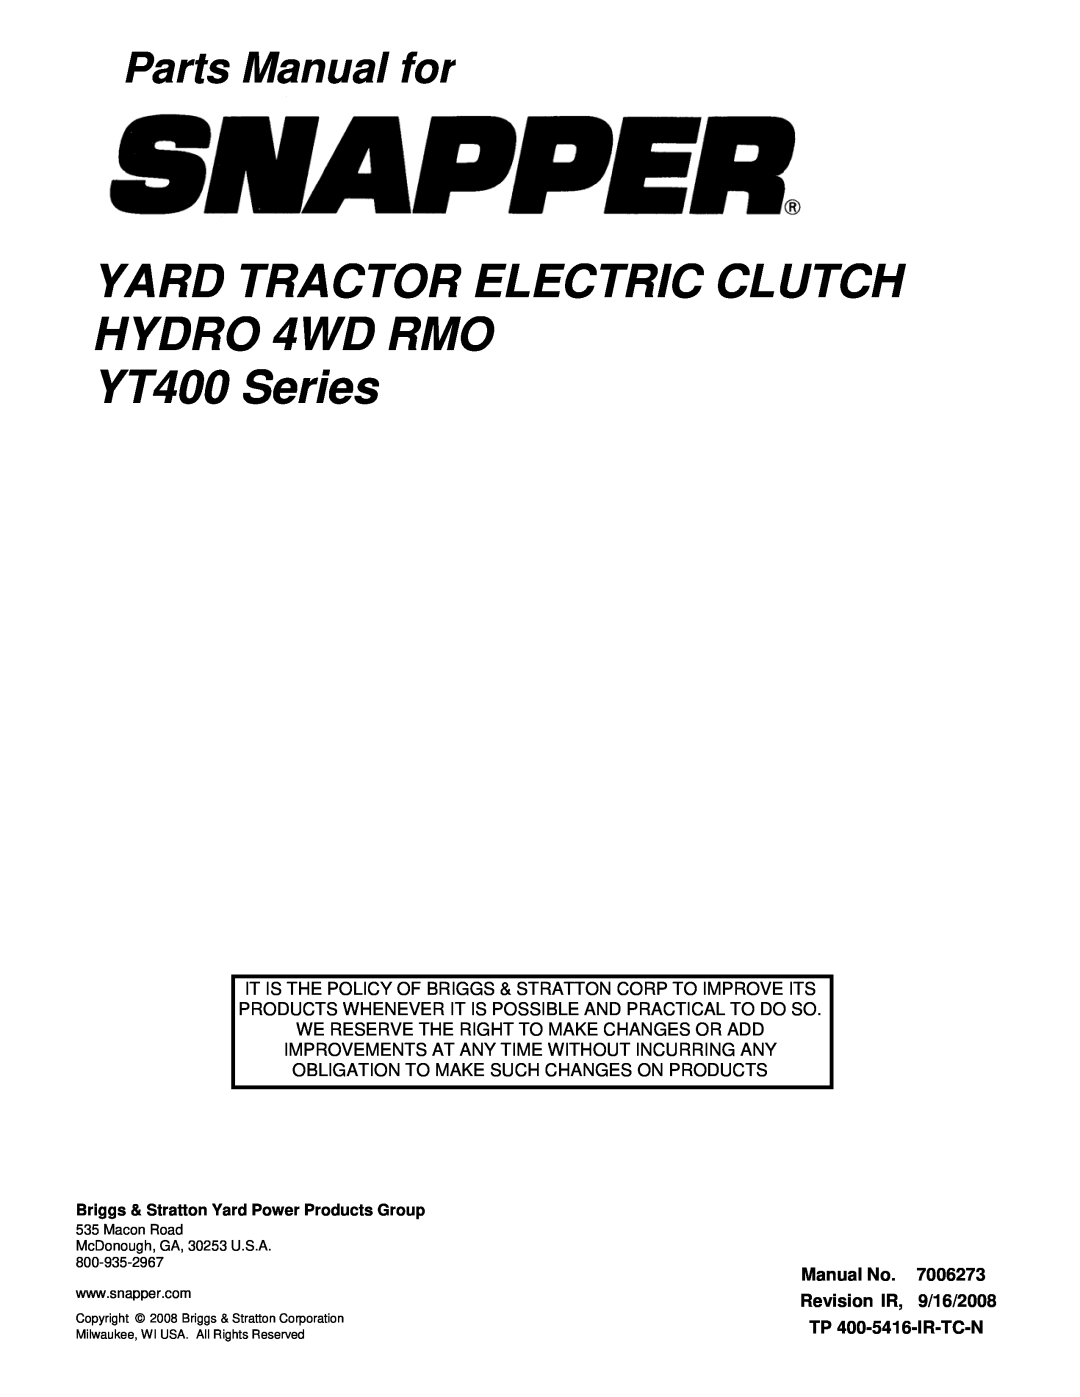 Snapper YT2350 4WD manual YARD TRACTOR ELECTRIC CLUTCH HYDRO 4WD RMO, YT400 Series, Parts Manual for, Manual No, 7006273 